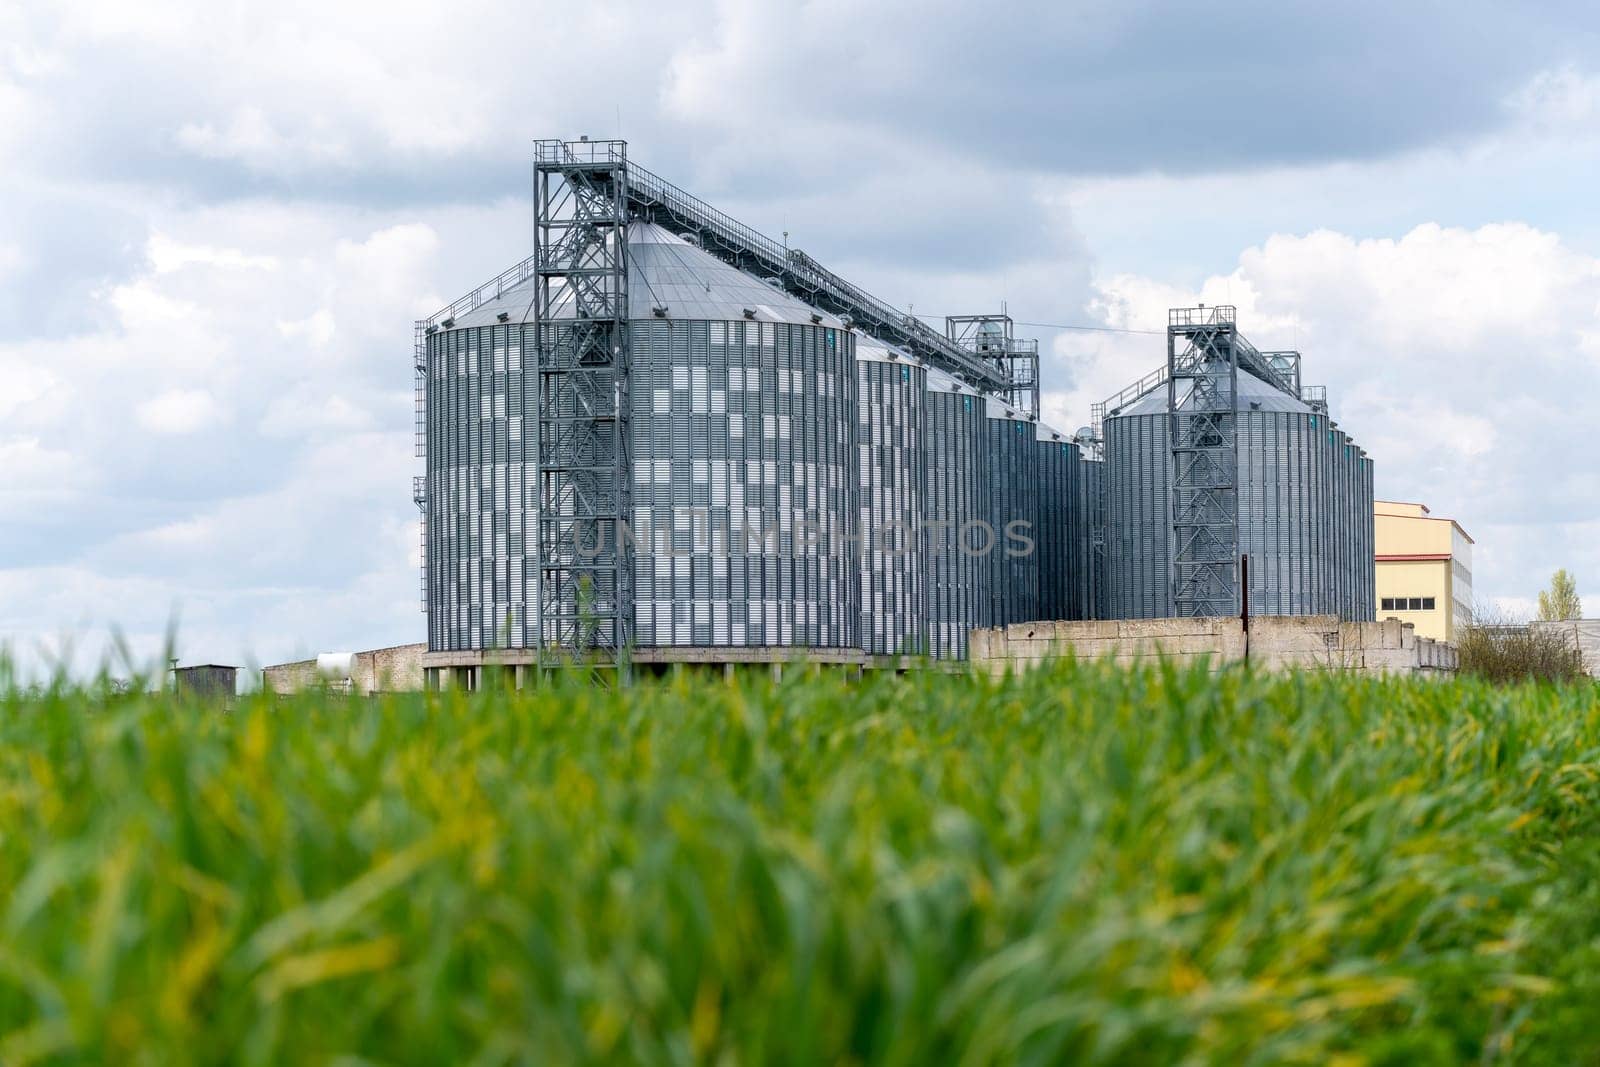 Granary elevator, silver silos on agro manufacturing plant for processing drying cleaning and storage of agricultural products, flour, cereals and grain. A field of green wheat